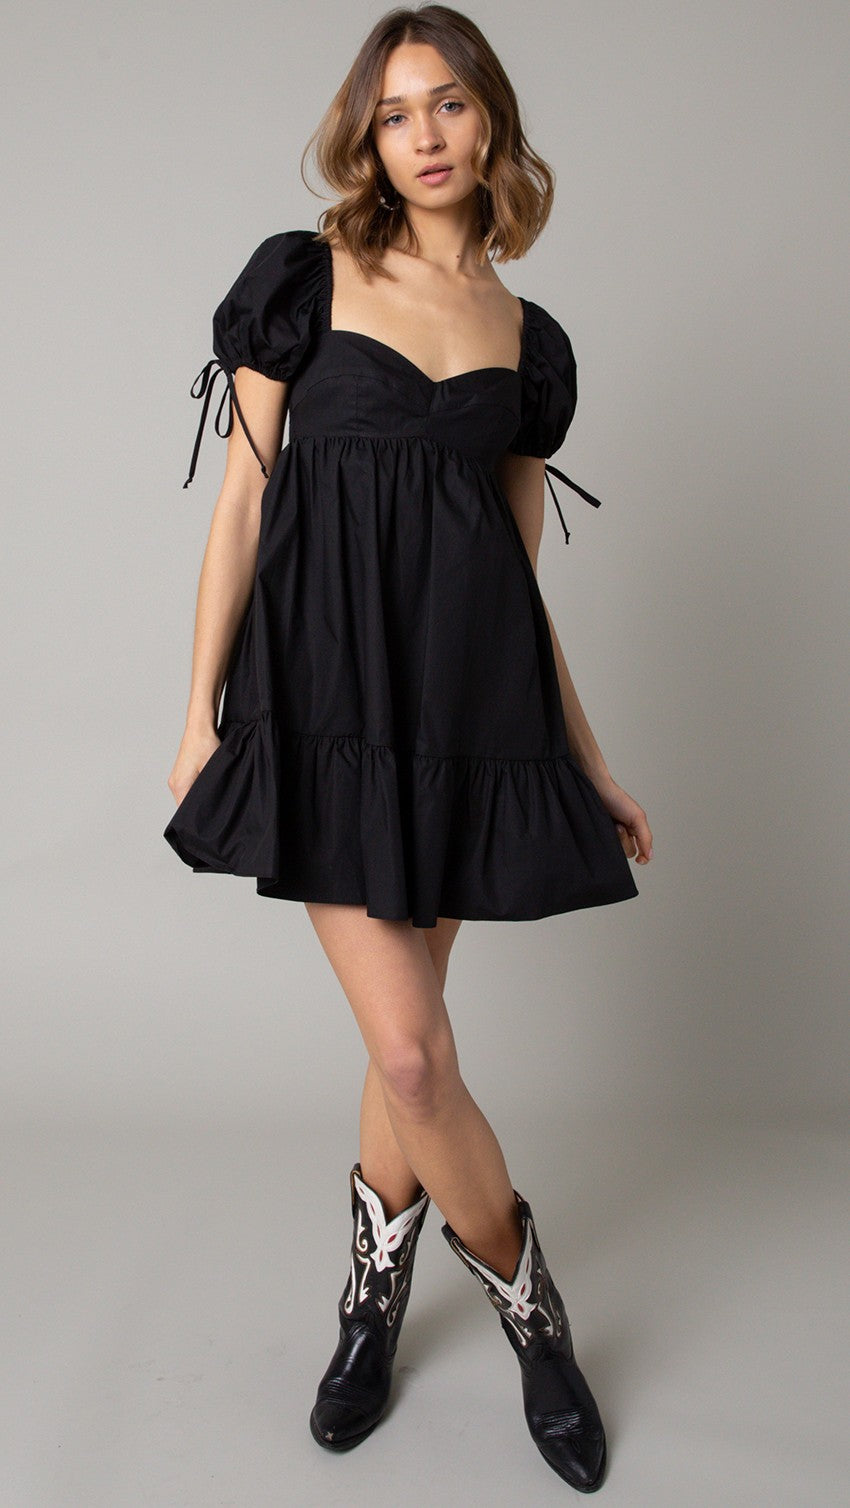 Black Baby Doll Tie Dress | Collective Request 